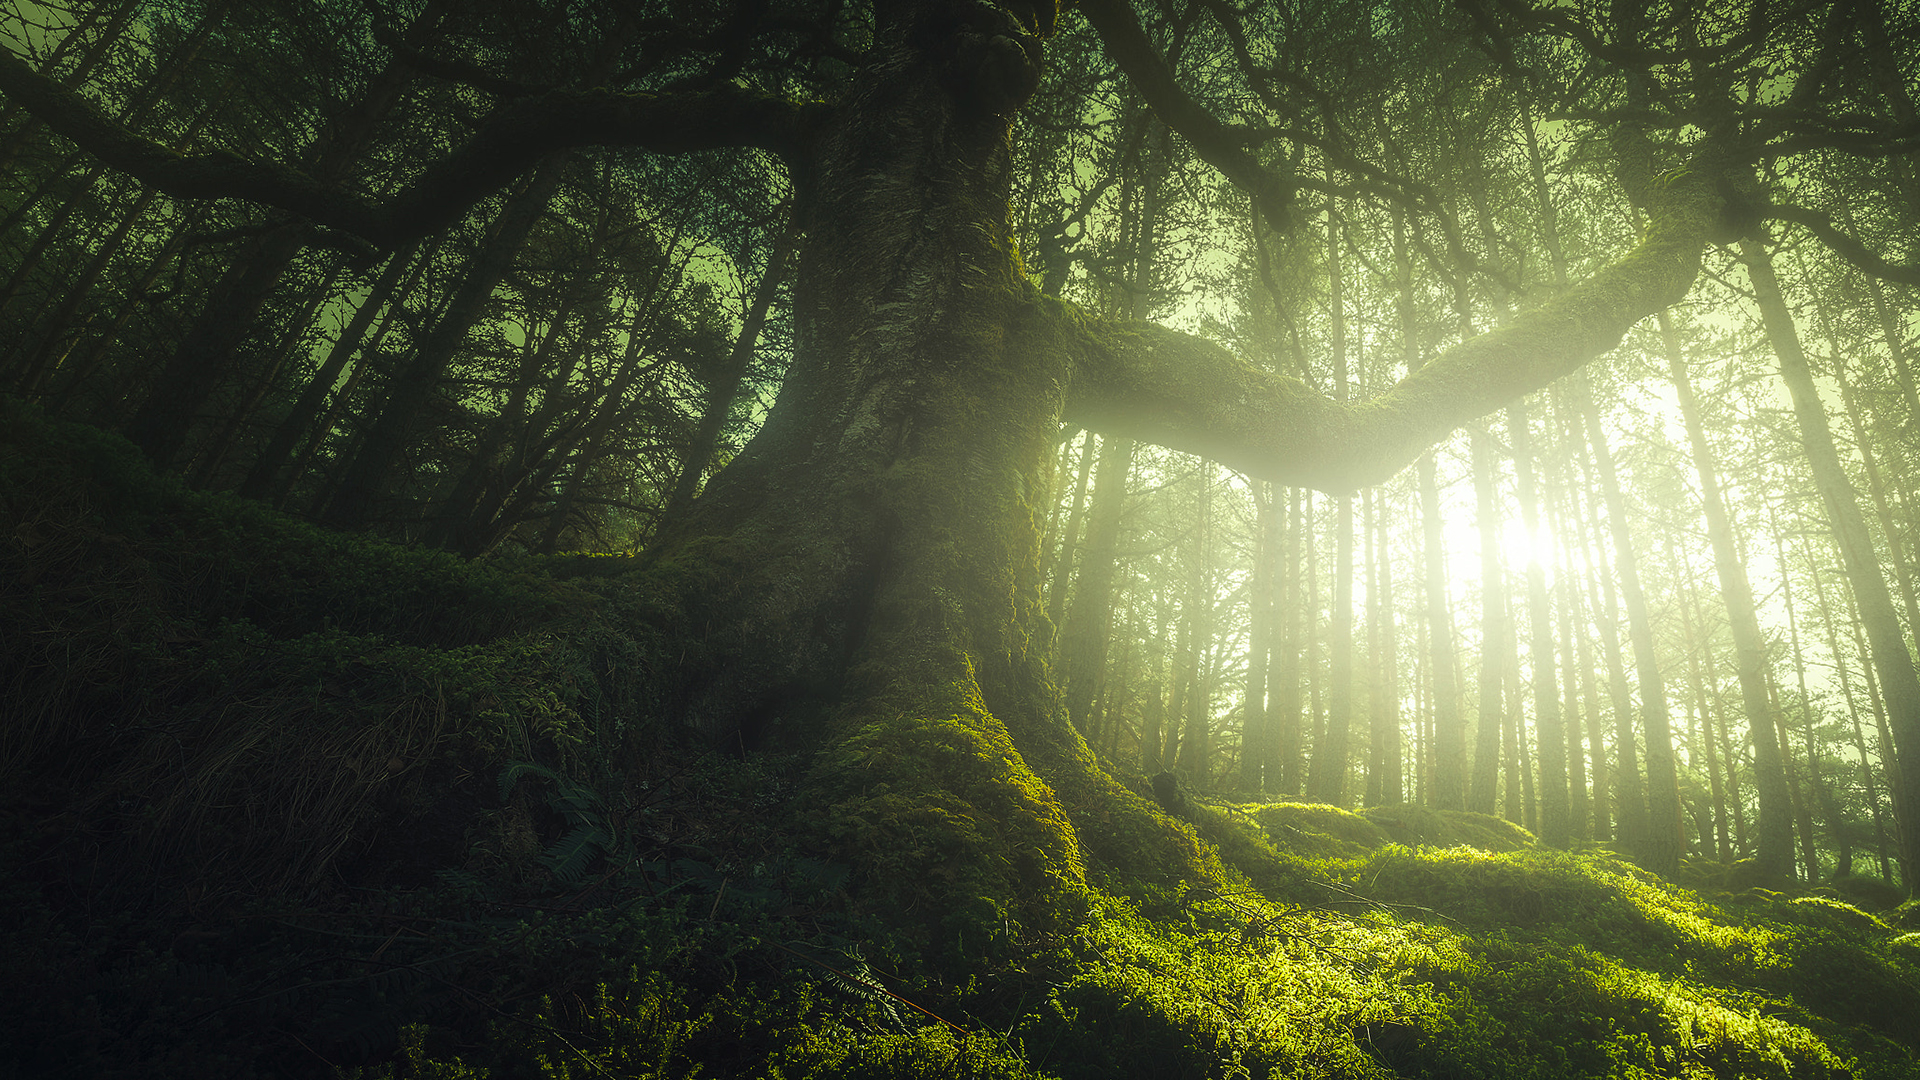 How to capture epic wide-angle photos of trees